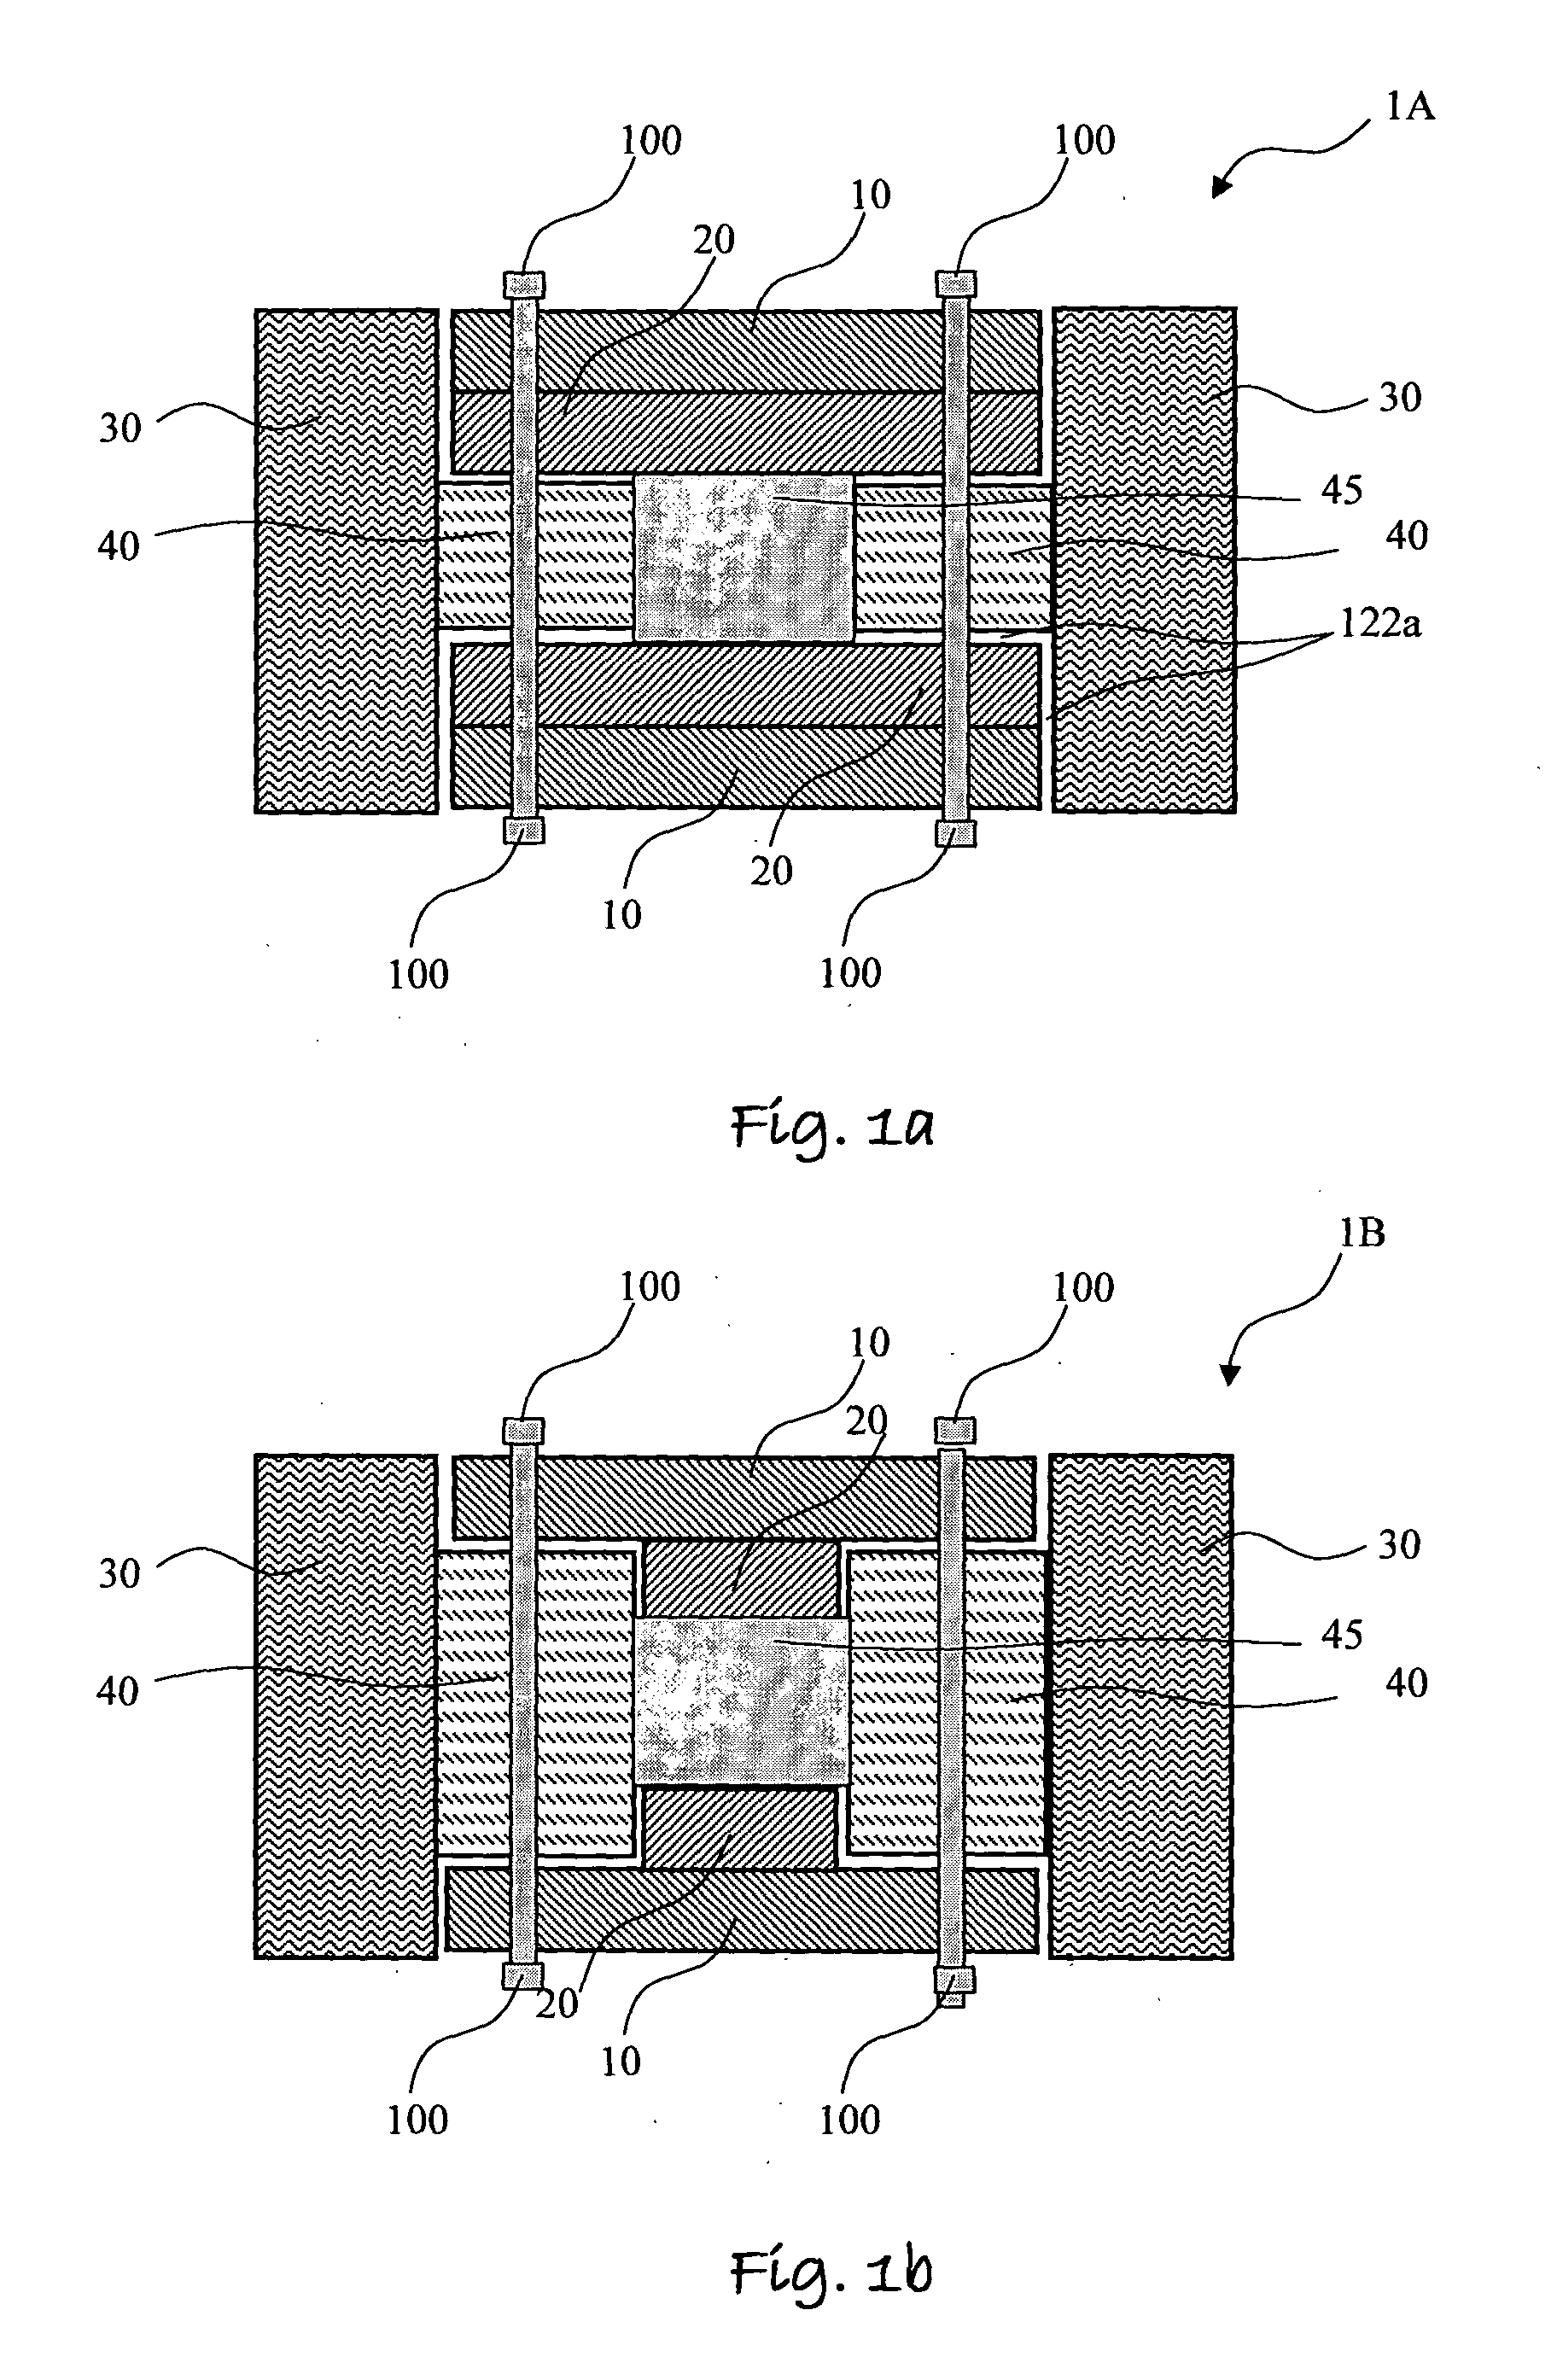 Cage in an mrd with a fastening/attenuating system